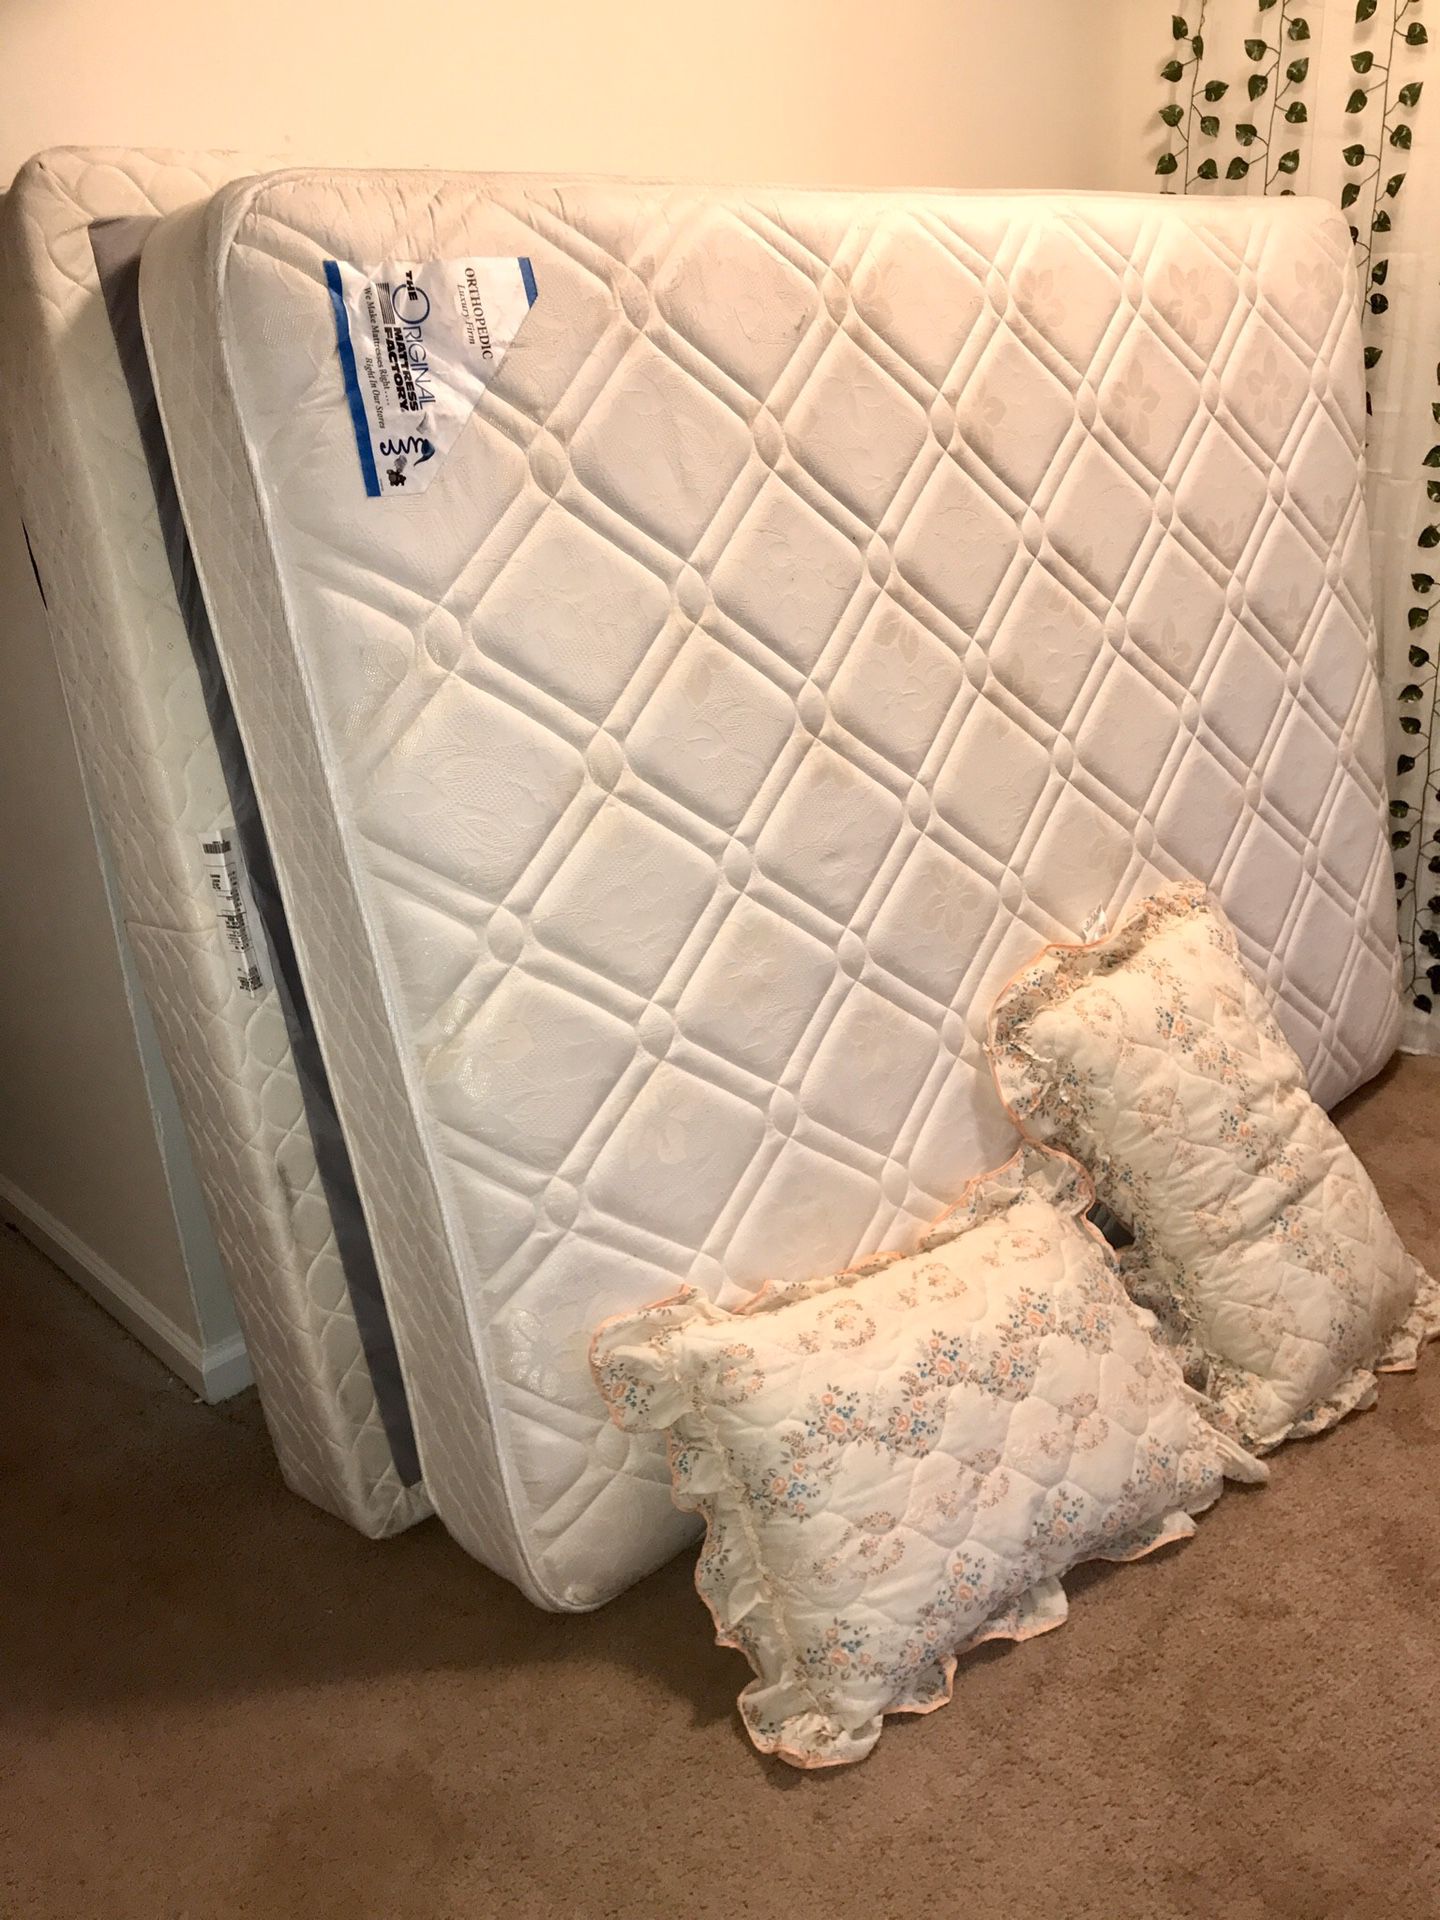 King Size Mattress + Boxspring + 2 Pillows (Great Condition) No issues First come first serve. No Smoking ,No Stains, No Bugs, No Pets, No Bad Odor.